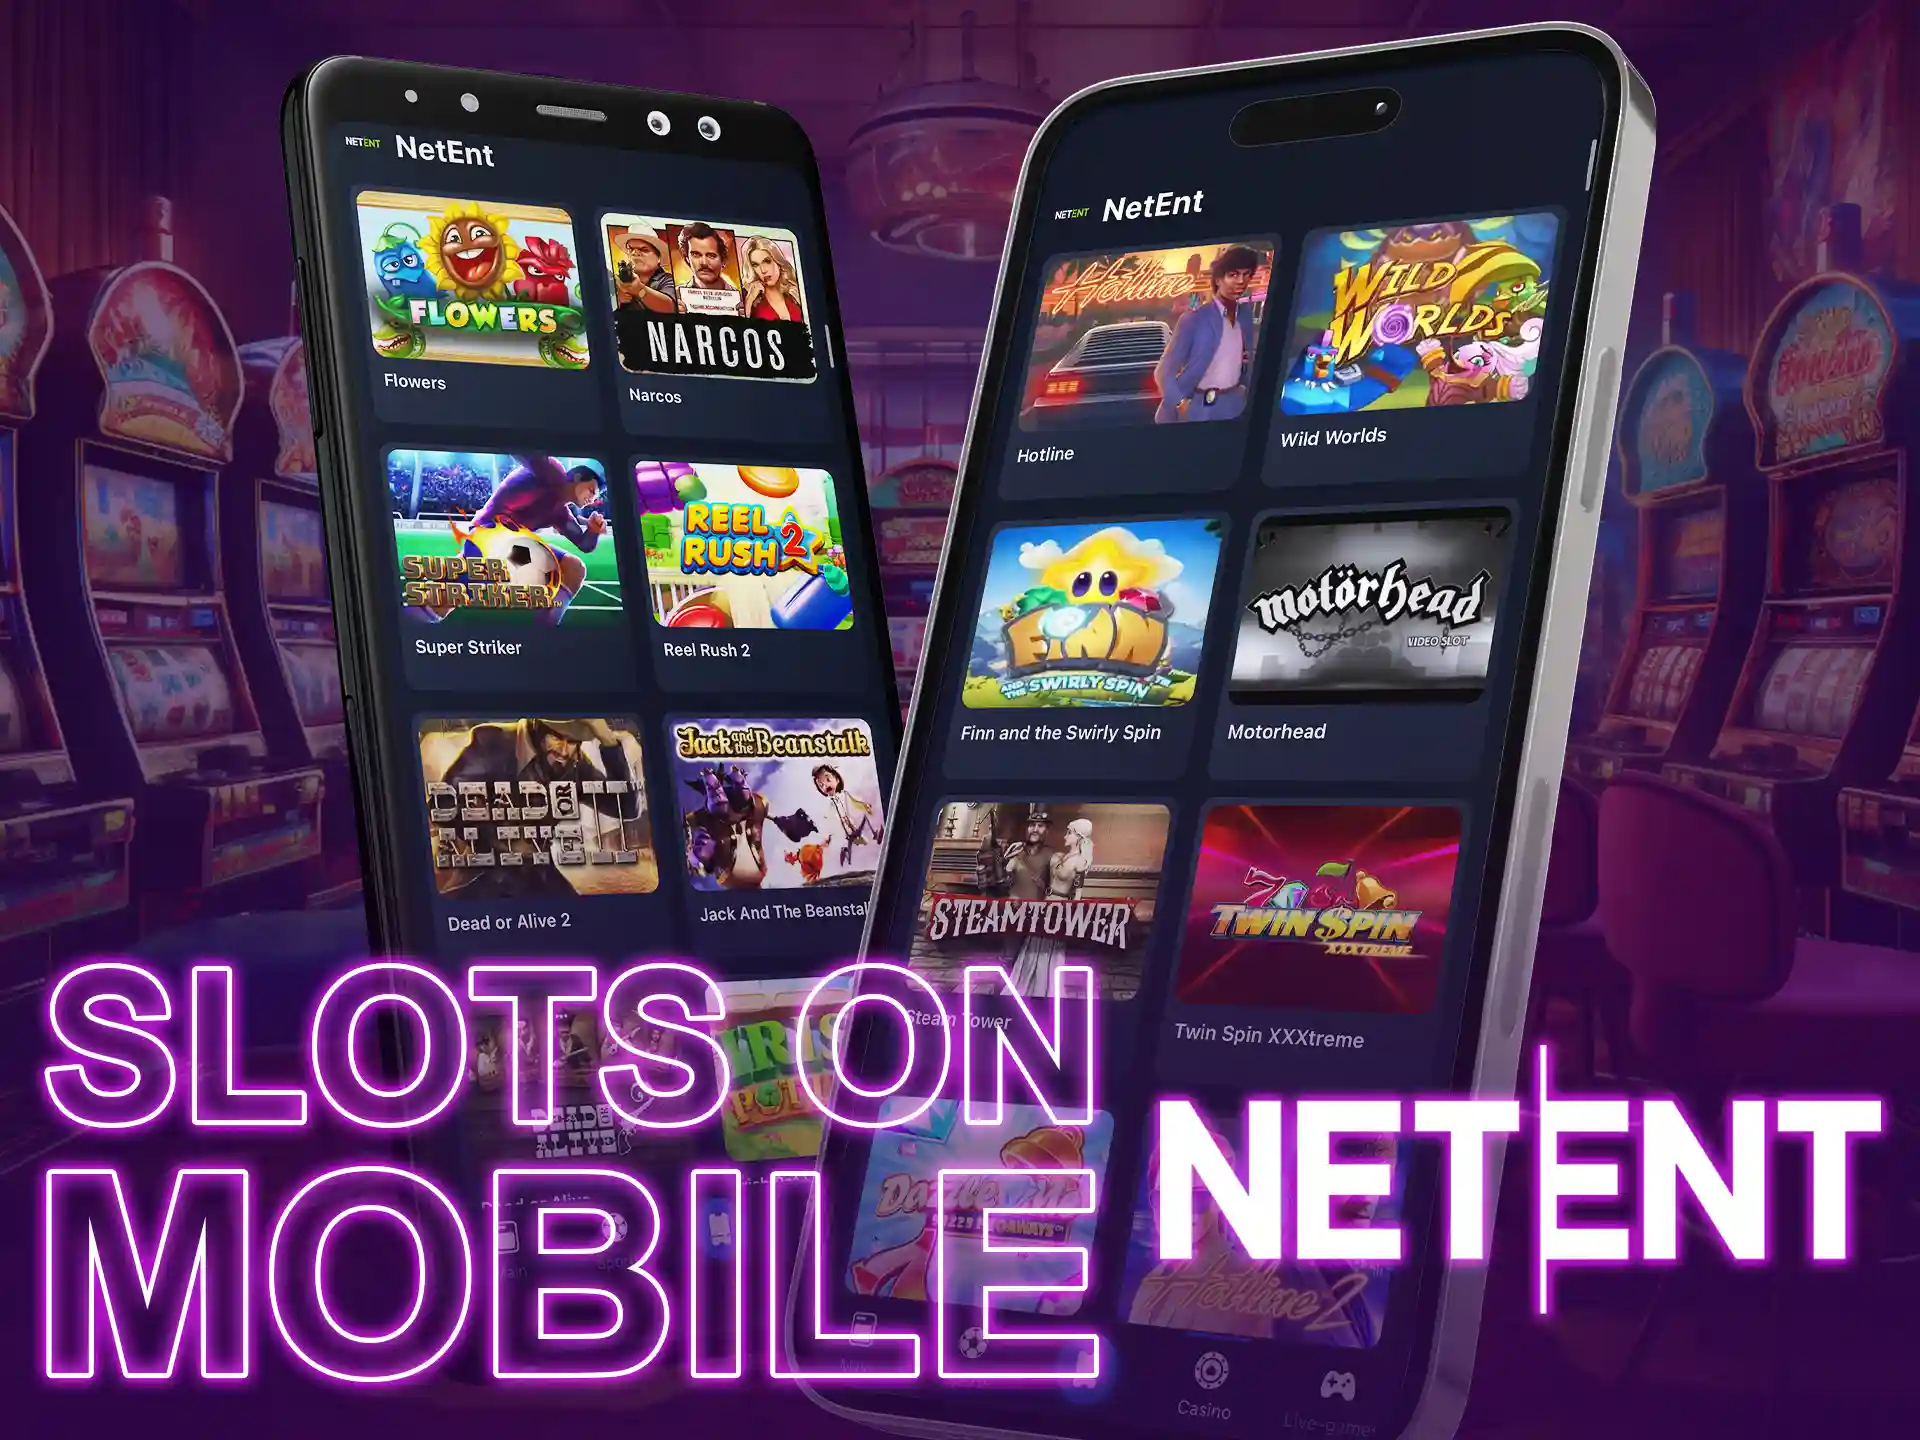 The games of the provider Netent are adapted for mobile devices.